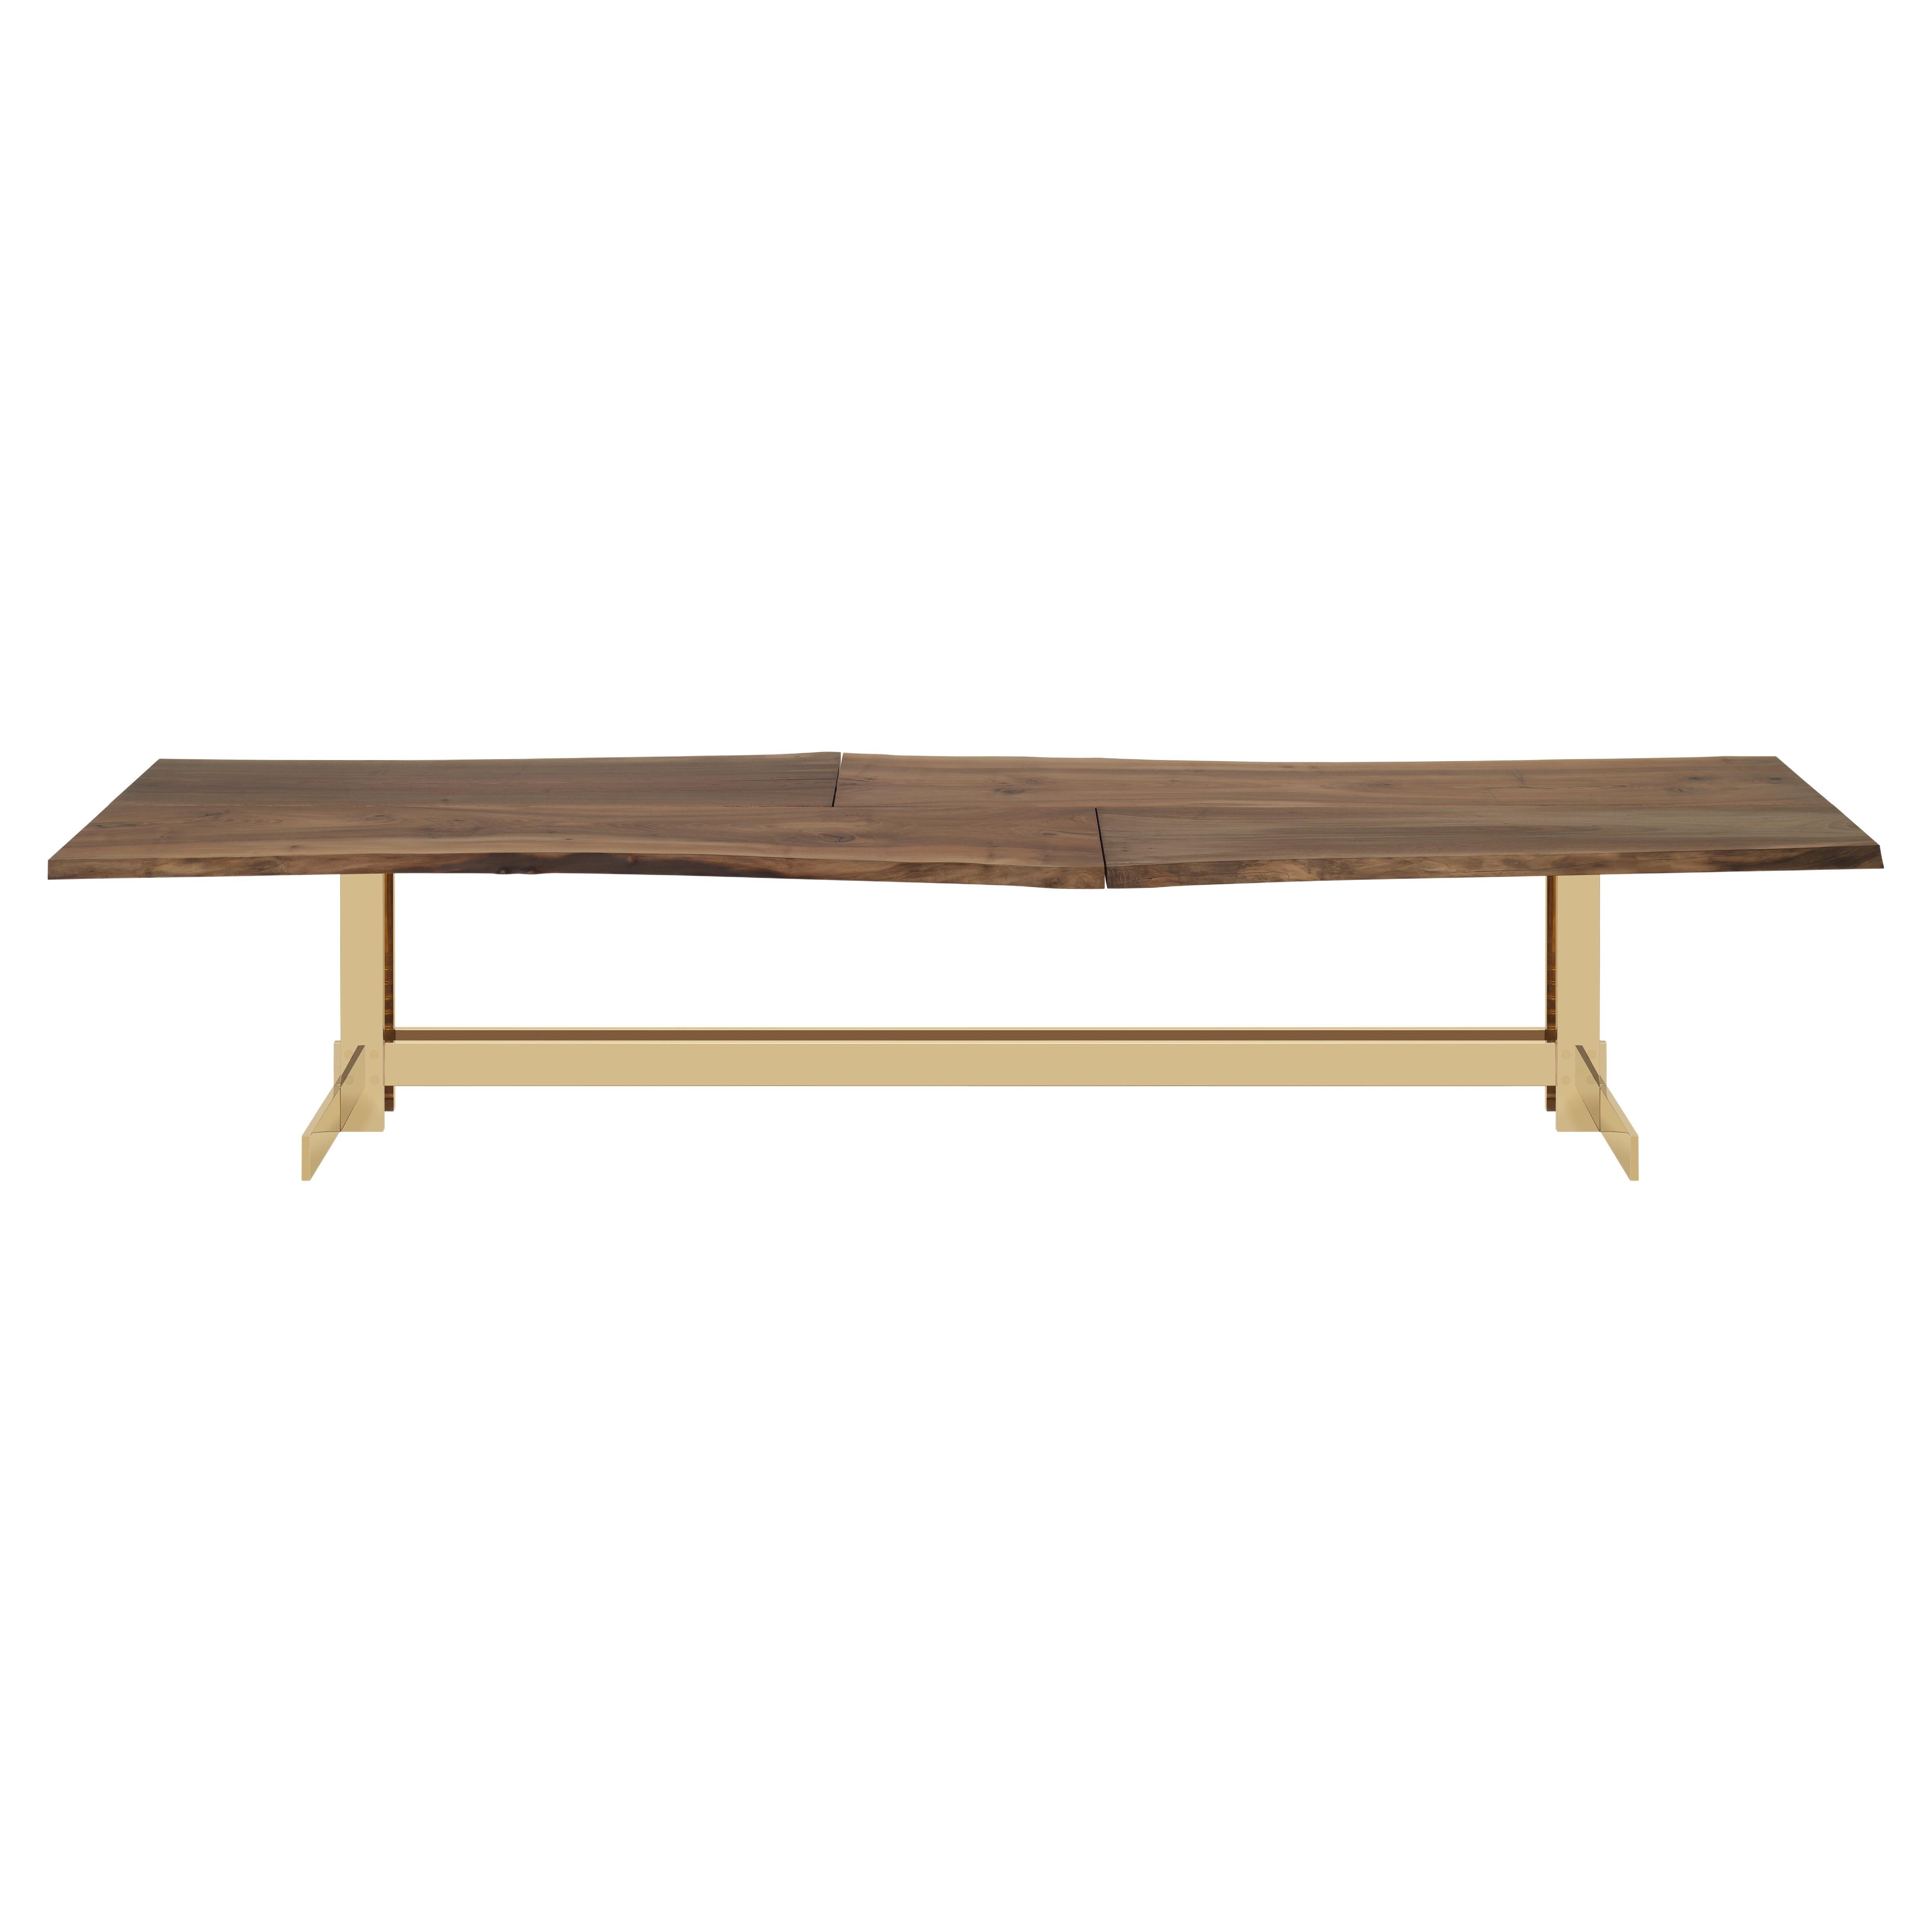 Philipp Mainzer Trunk II Table in Walnut and Polished Brass for E15 Selected